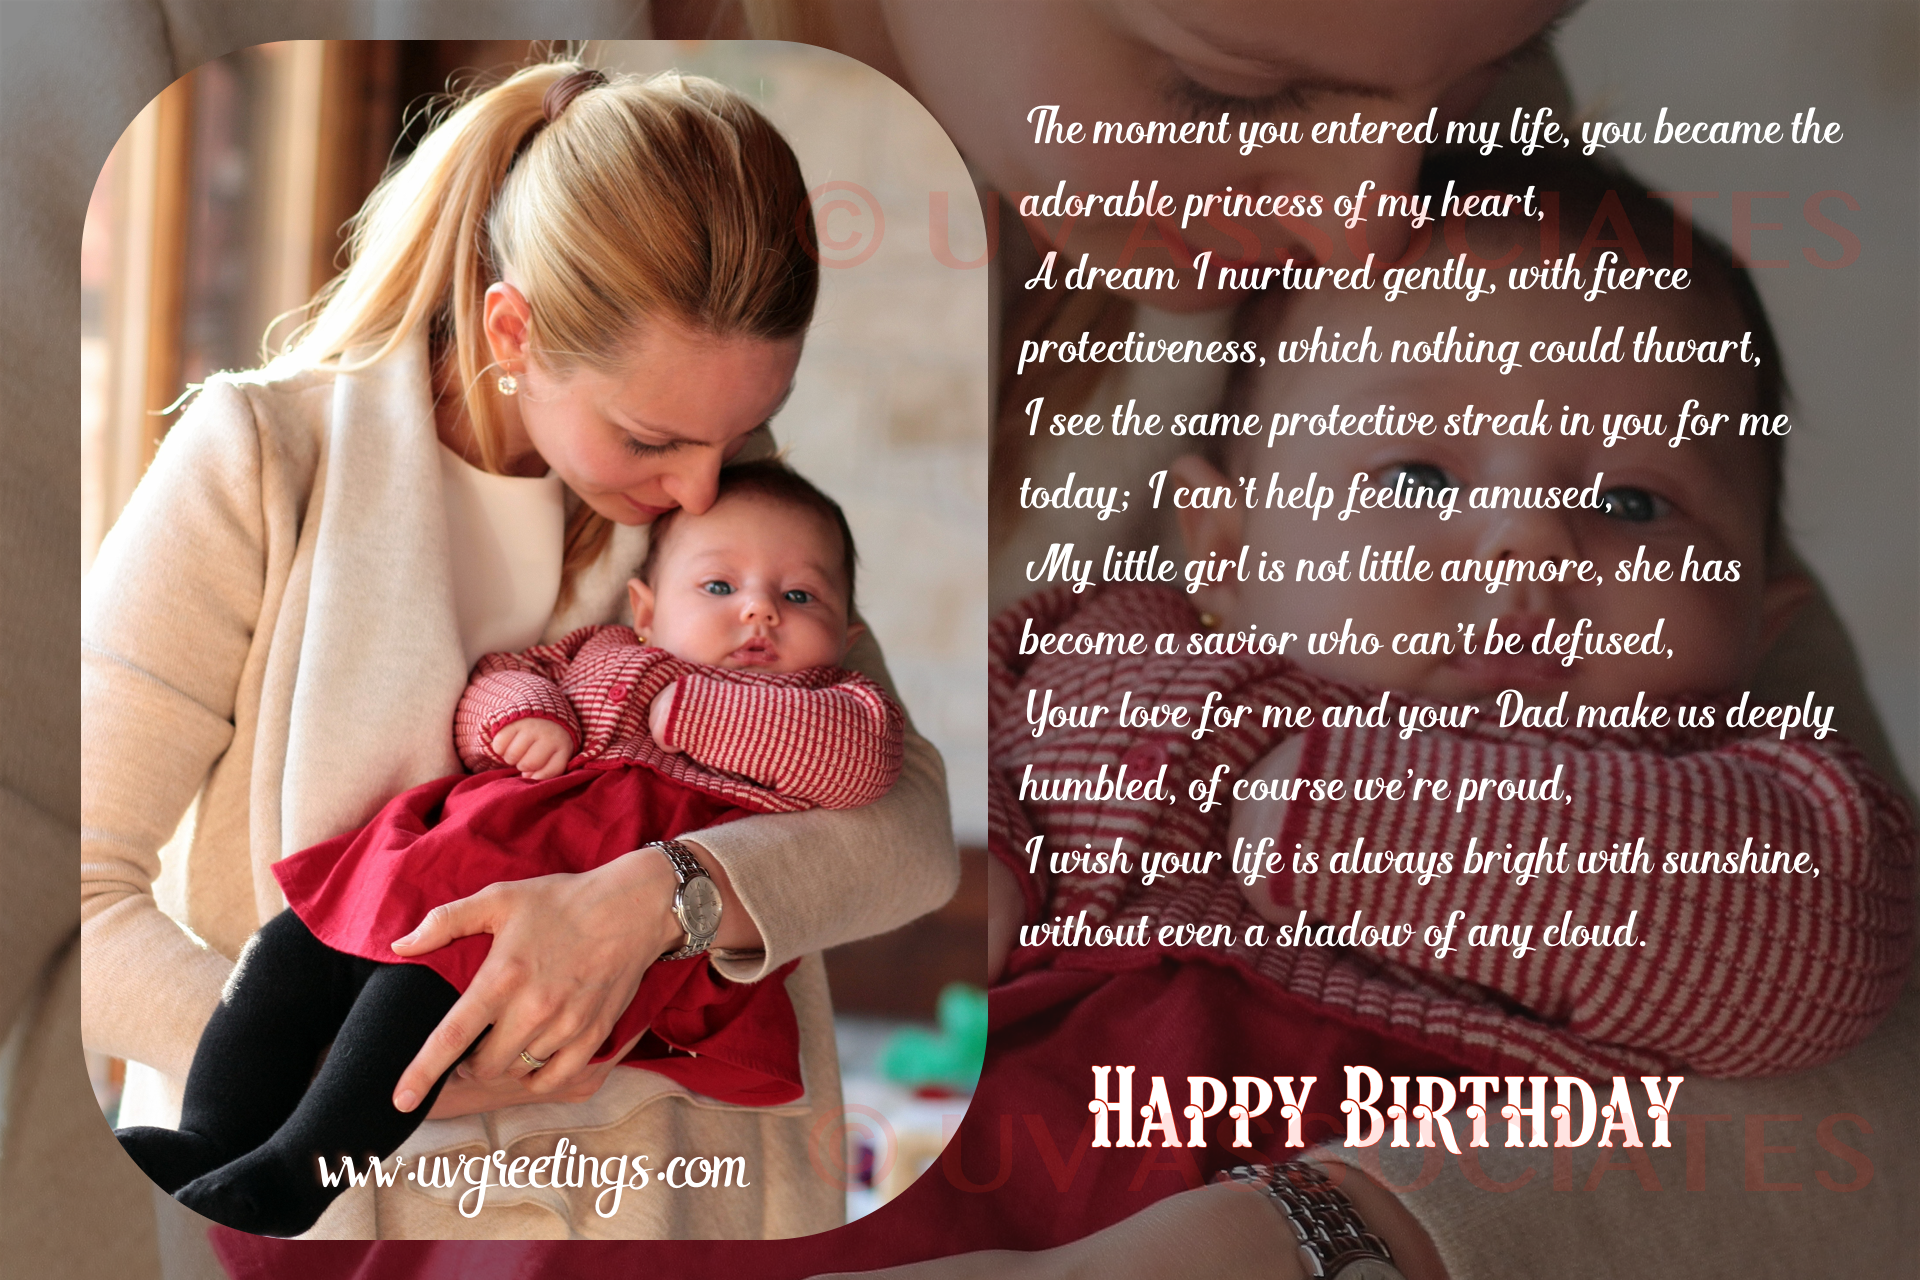 Birthday eCard For a Protective Daughter